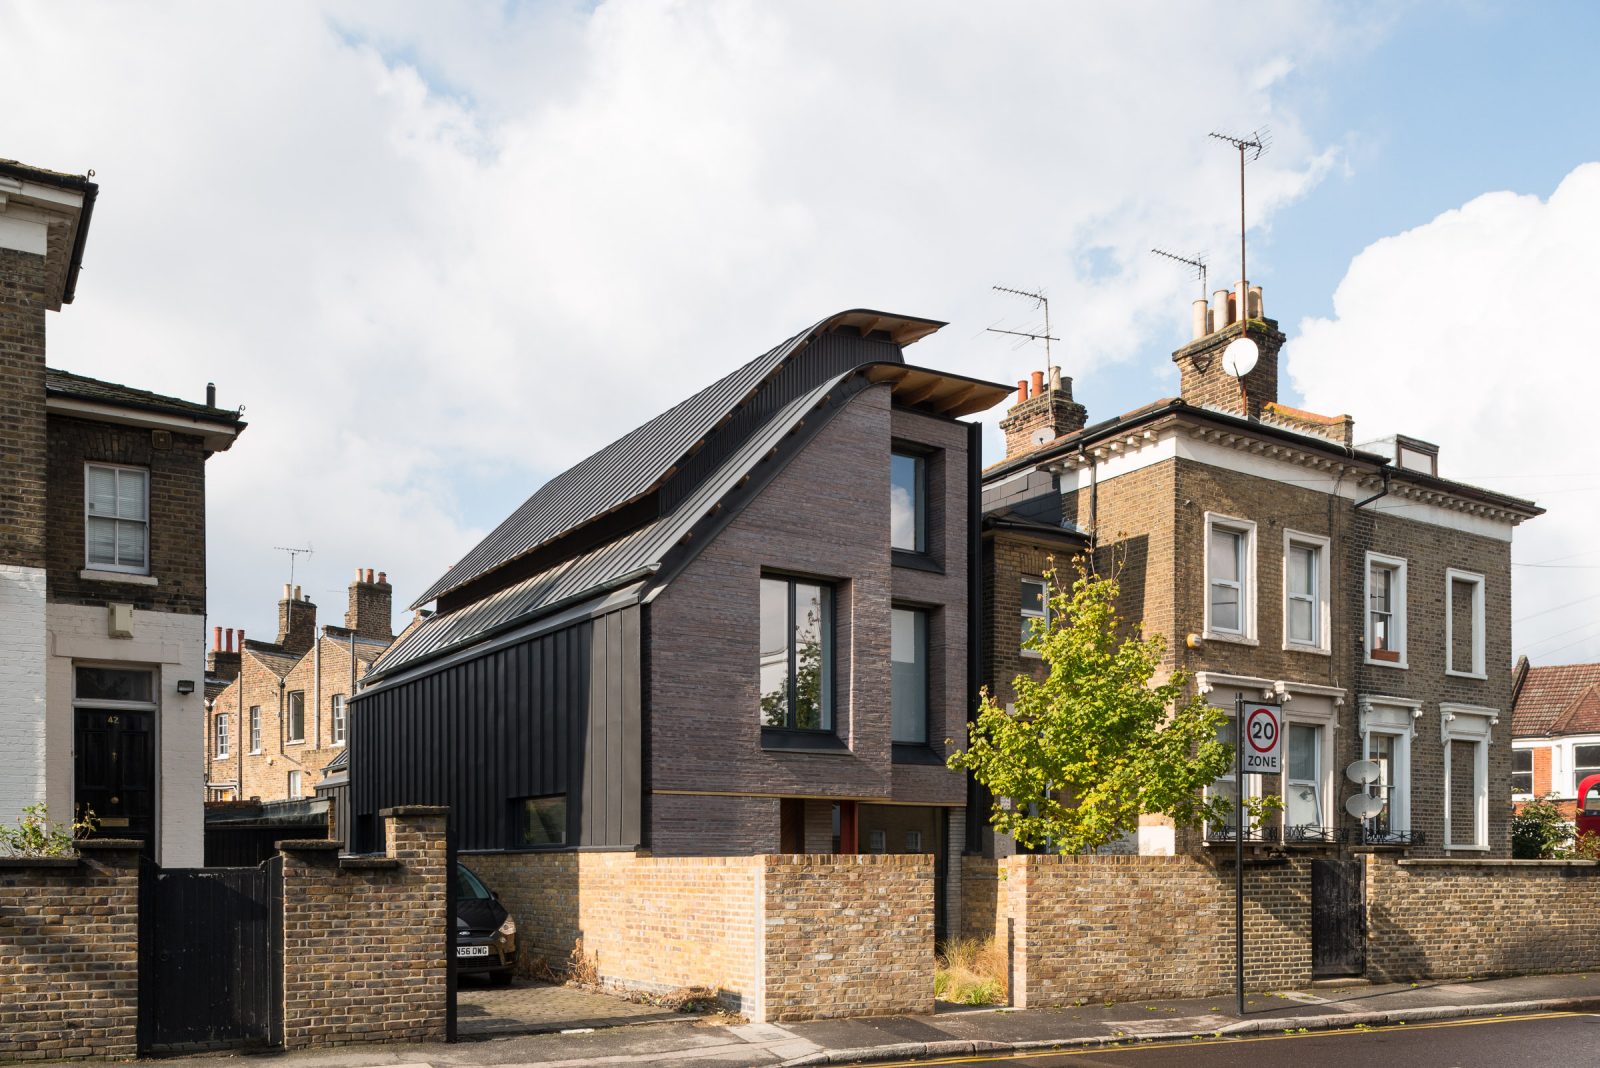 Architecture on the Market: 7 Bold Contemporary Homes in London